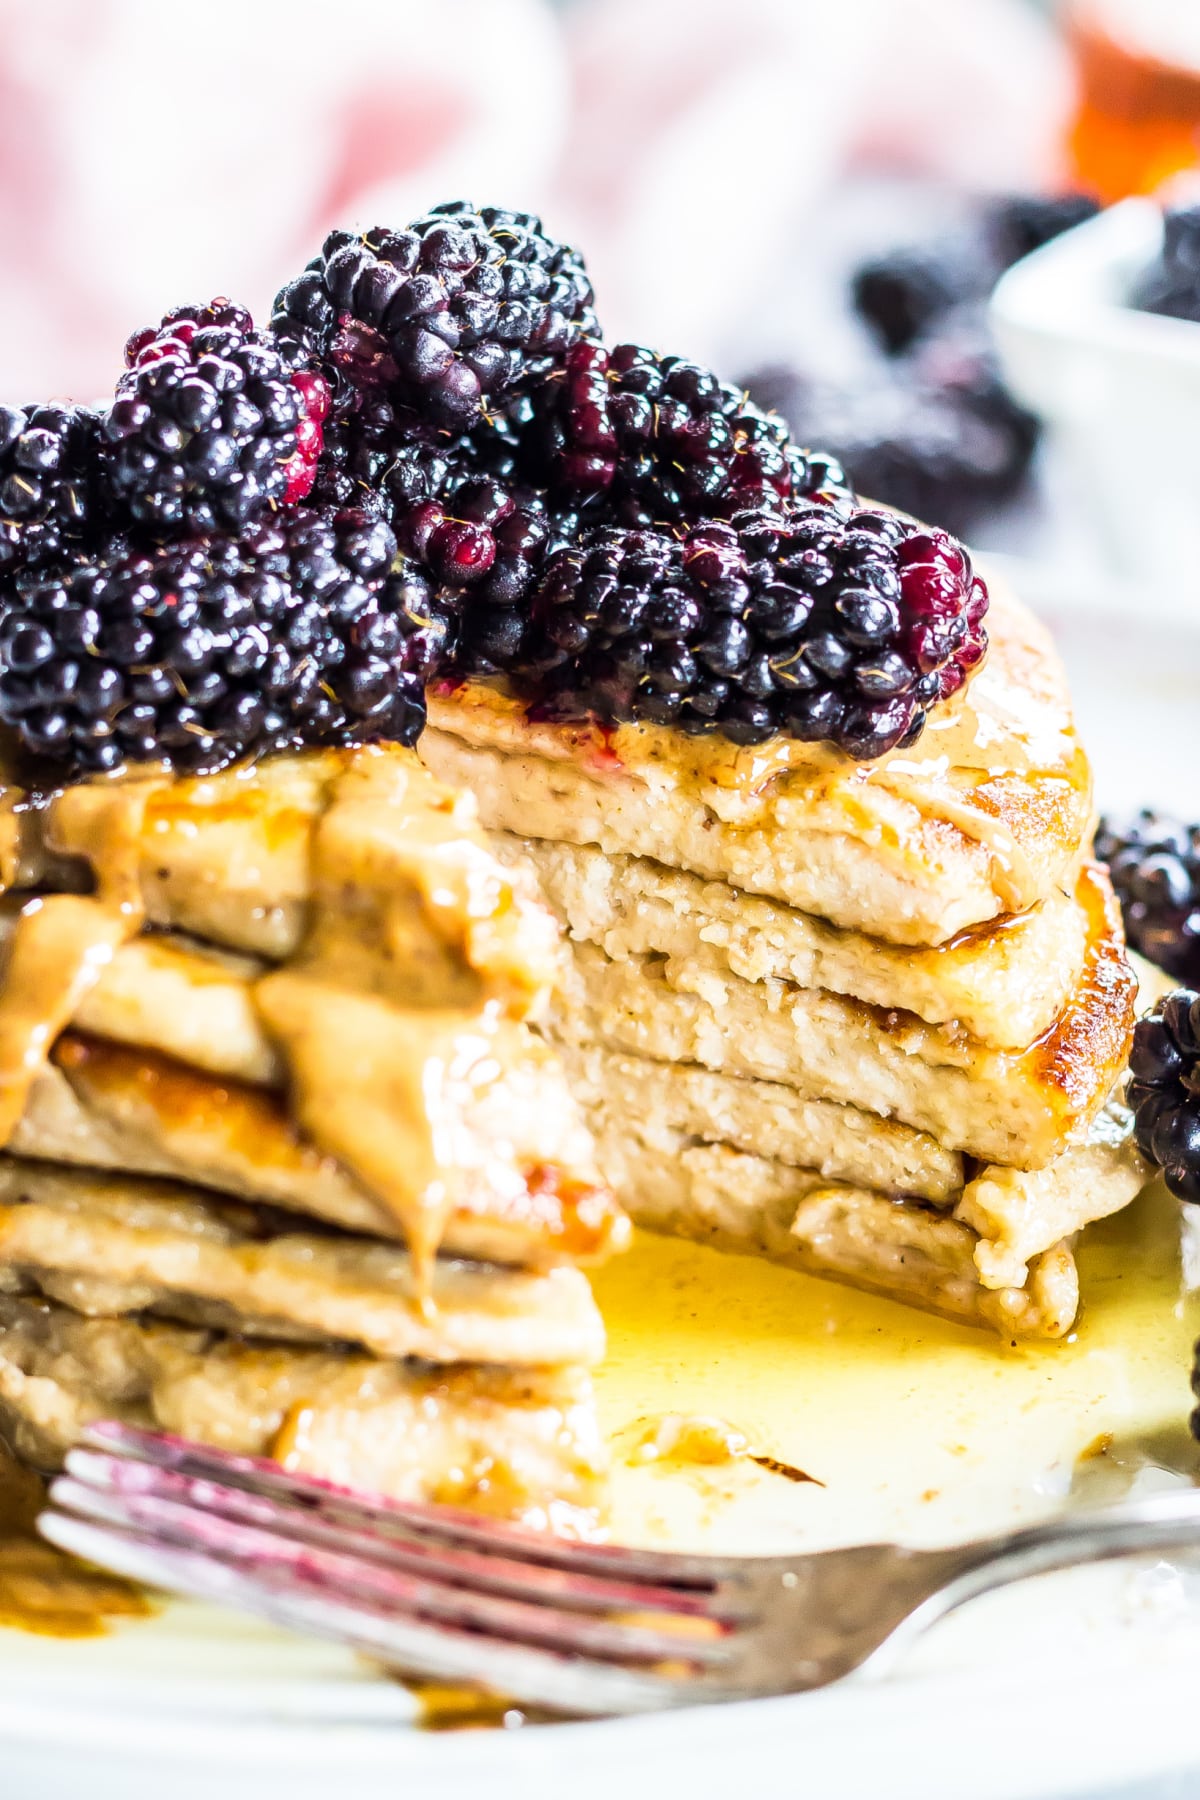 A stack of pancakes topped with peanut butter and blackberries has one bite sliced out, and a fork on the side.